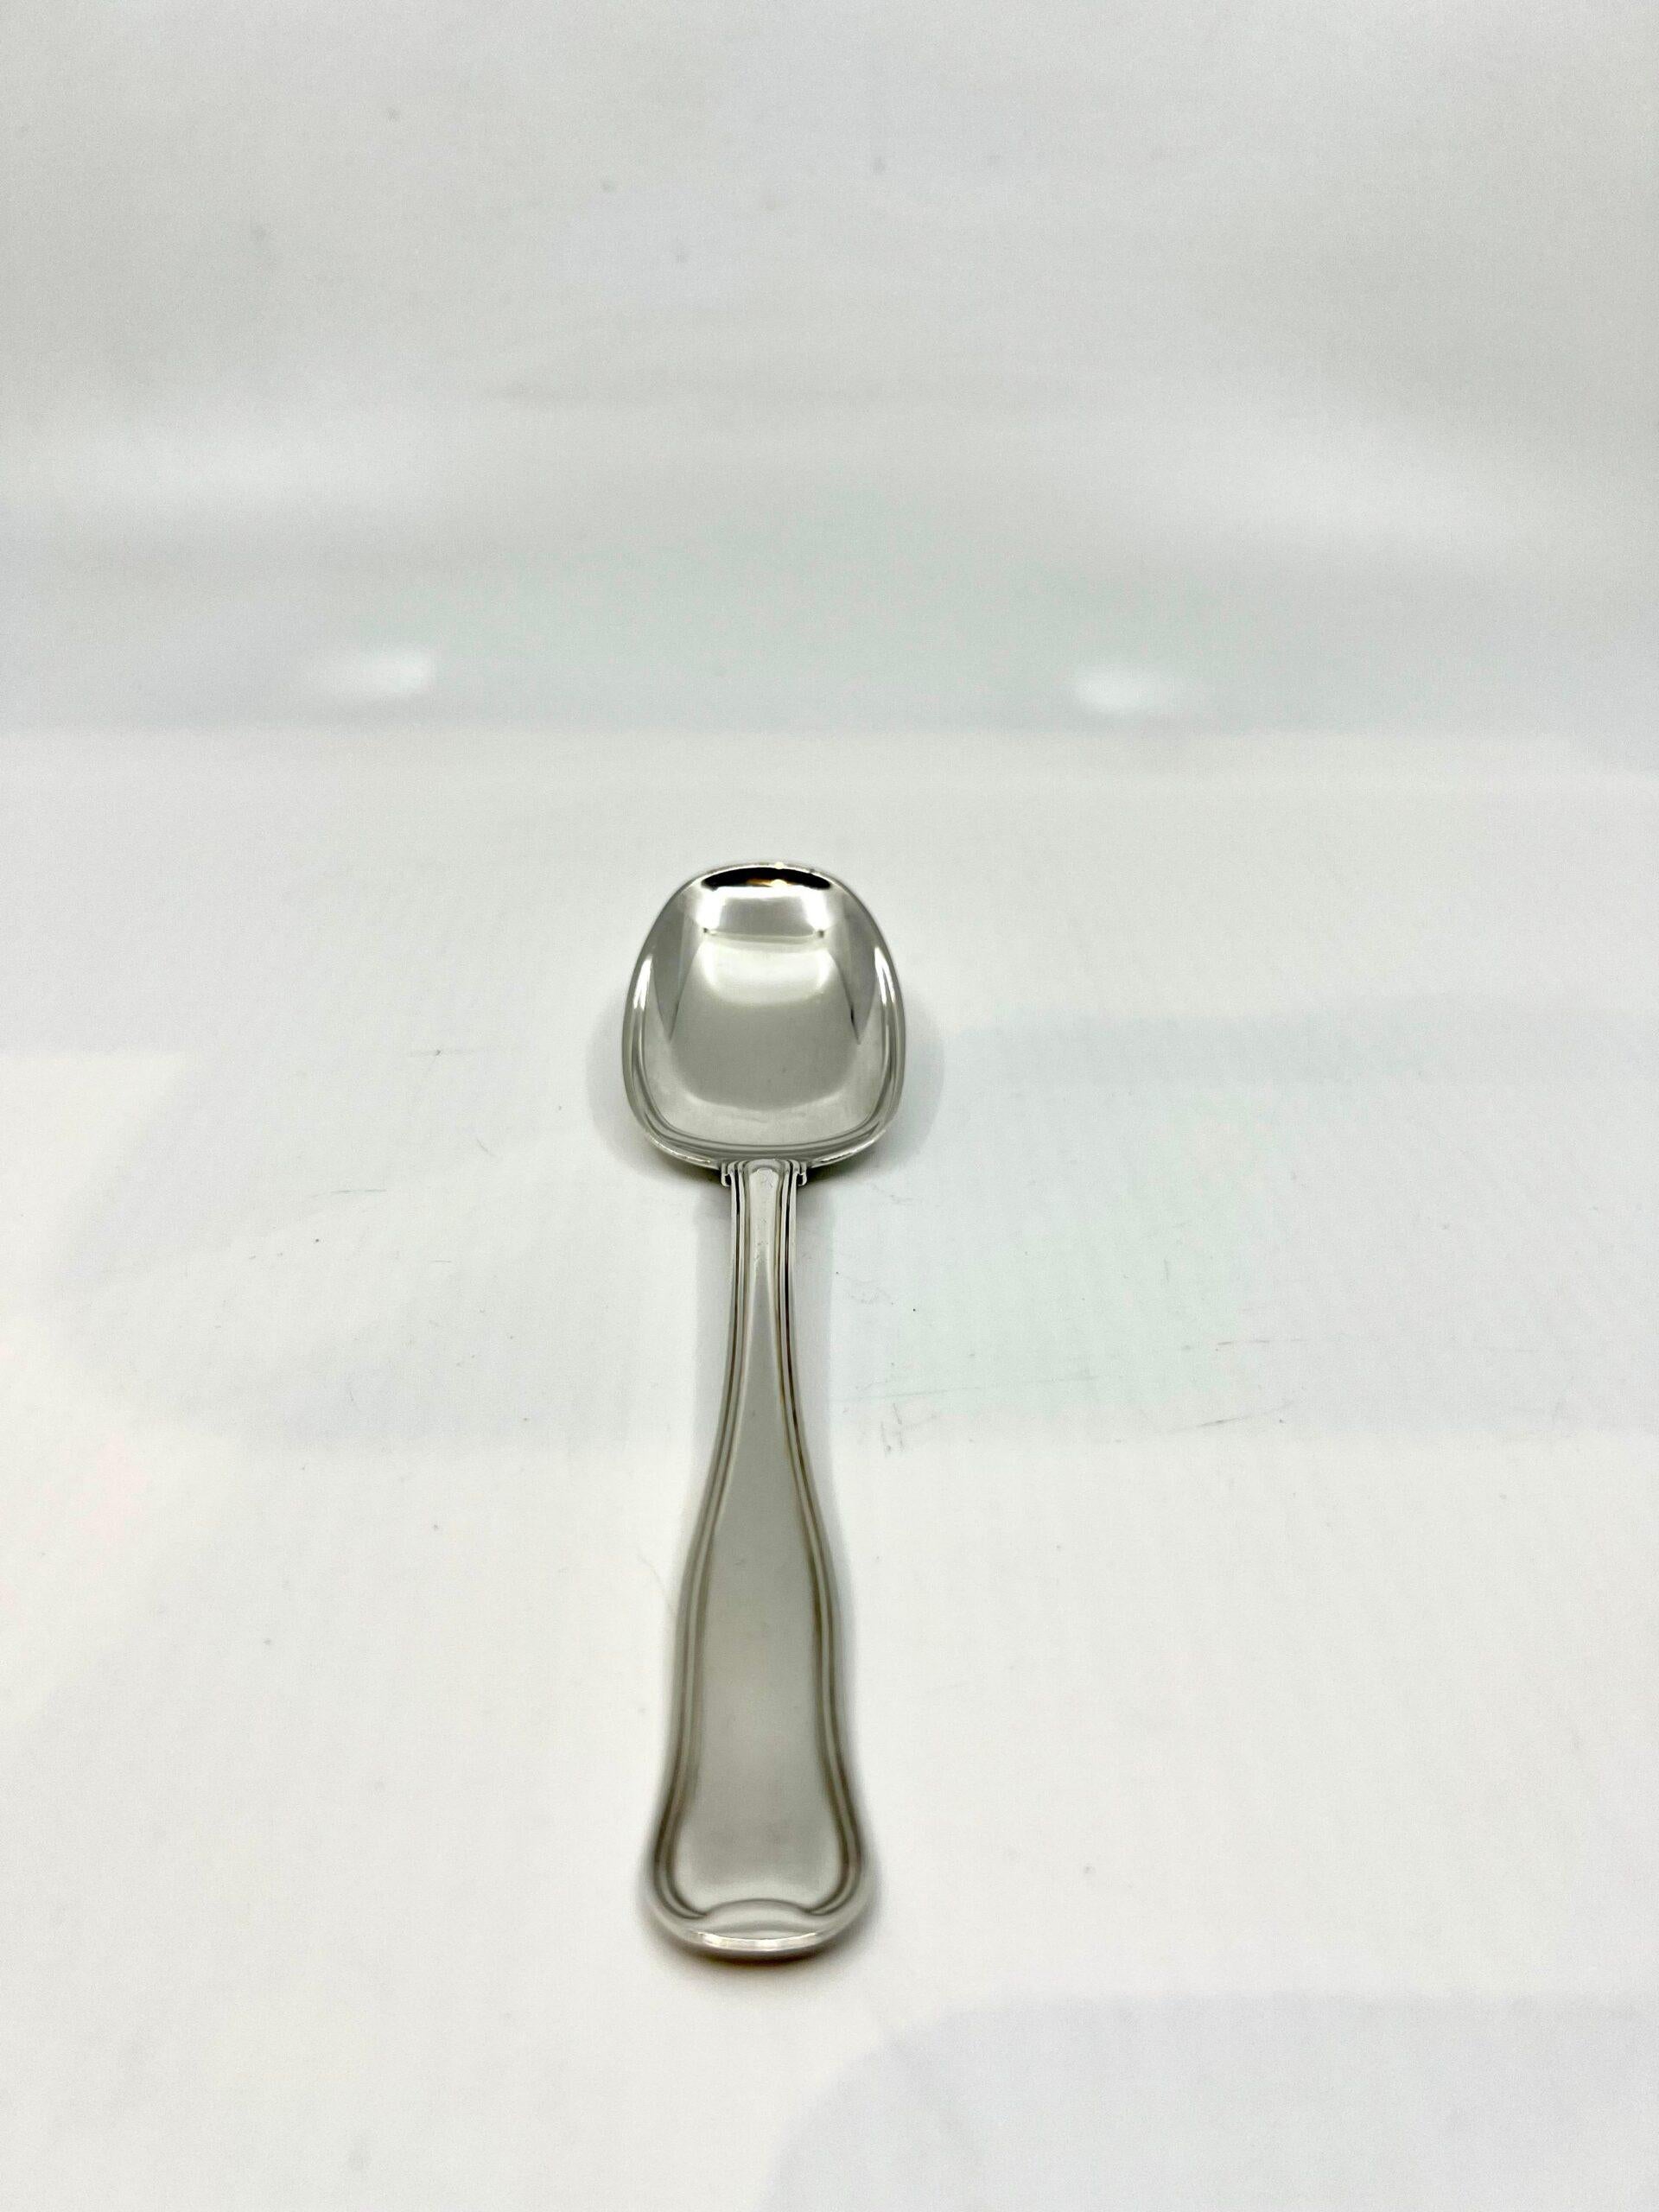 Sterling silver Georg Jensen large teaspoon/child spoon, item 031 in the Old Danish pattern, design #100 by Harald Nielsen from 1947.

Additional information:
Material: Sterling silver
Styles: Art Deco
Hallmarks: Hallmarks: With Georg Jensen